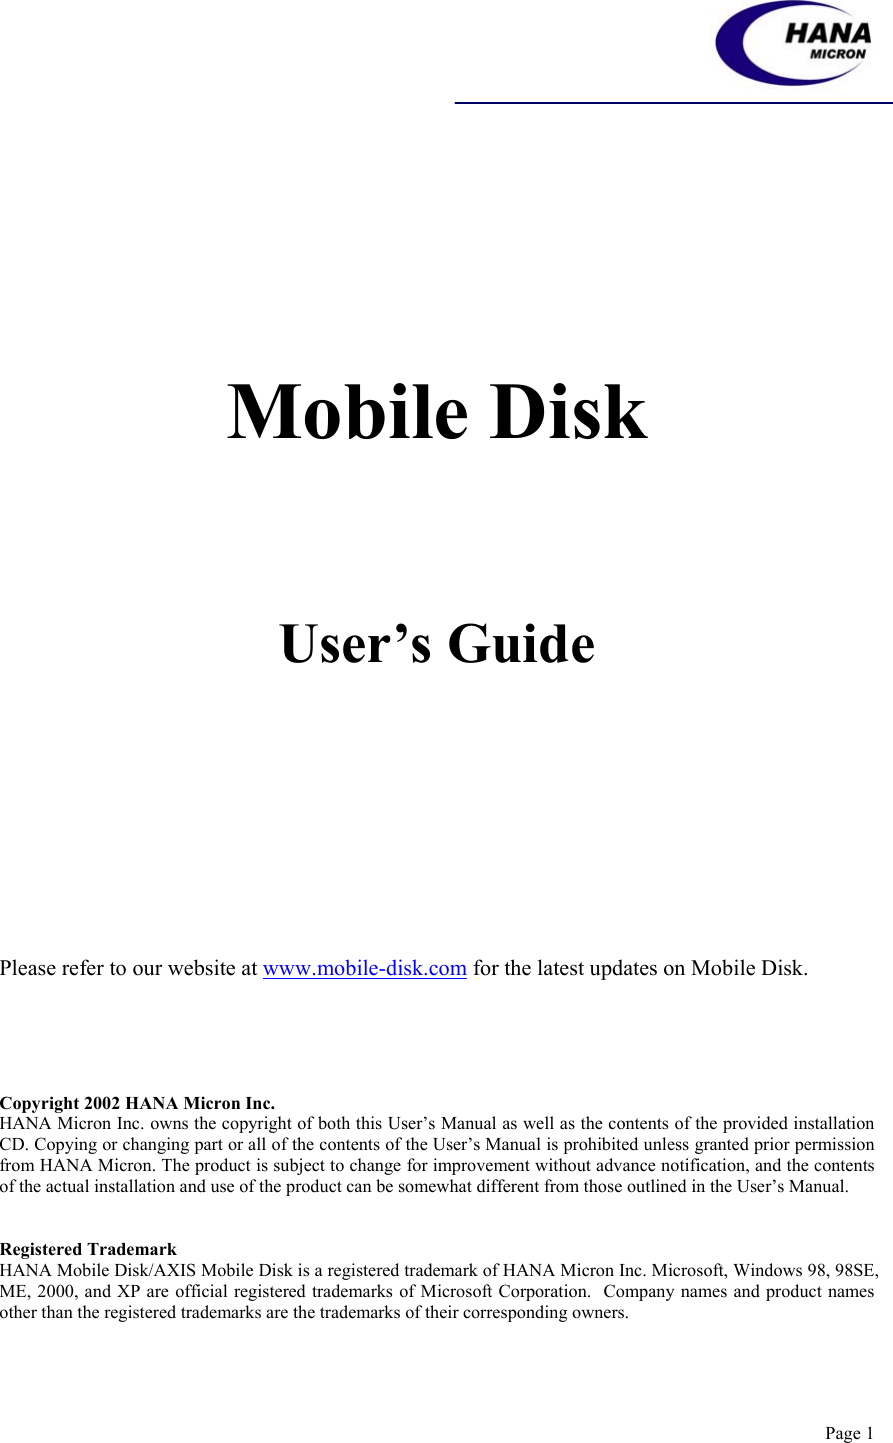    Page 1         Mobile Disk     User’s Guide                                     Please refer to our website at www.mobile-disk.com for the latest updates on Mobile Disk.     Copyright 2002 HANA Micron Inc. HANA Micron Inc. owns the copyright of both this User’s Manual as well as the contents of the provided installation CD. Copying or changing part or all of the contents of the User’s Manual is prohibited unless granted prior permission from HANA Micron. The product is subject to change for improvement without advance notification, and the contents of the actual installation and use of the product can be somewhat different from those outlined in the User’s Manual.   Registered Trademark HANA Mobile Disk/AXIS Mobile Disk is a registered trademark of HANA Micron Inc. Microsoft, Windows 98, 98SE, ME, 2000, and XP are official registered trademarks of Microsoft Corporation.  Company names and product names other than the registered trademarks are the trademarks of their corresponding owners. 